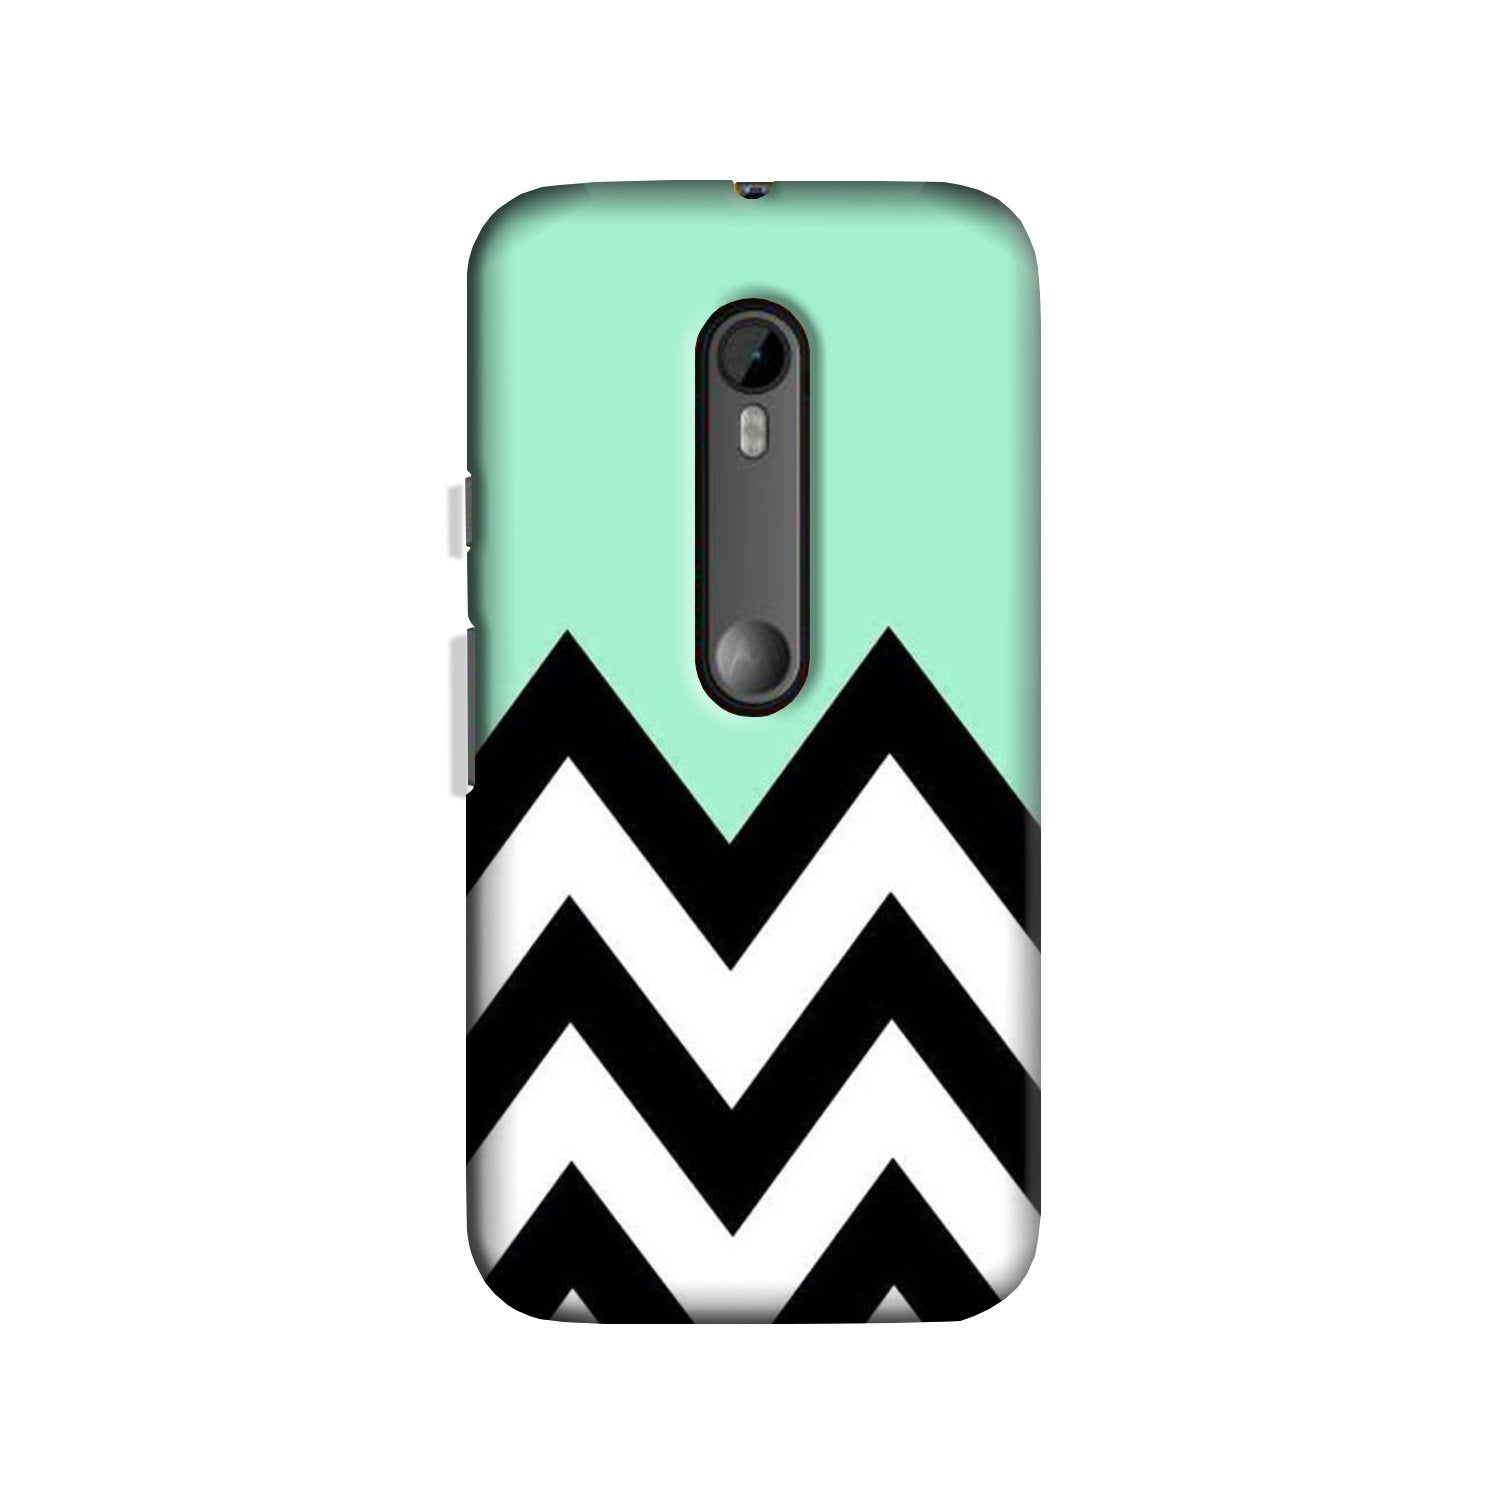 Pattern Case for Moto X Play